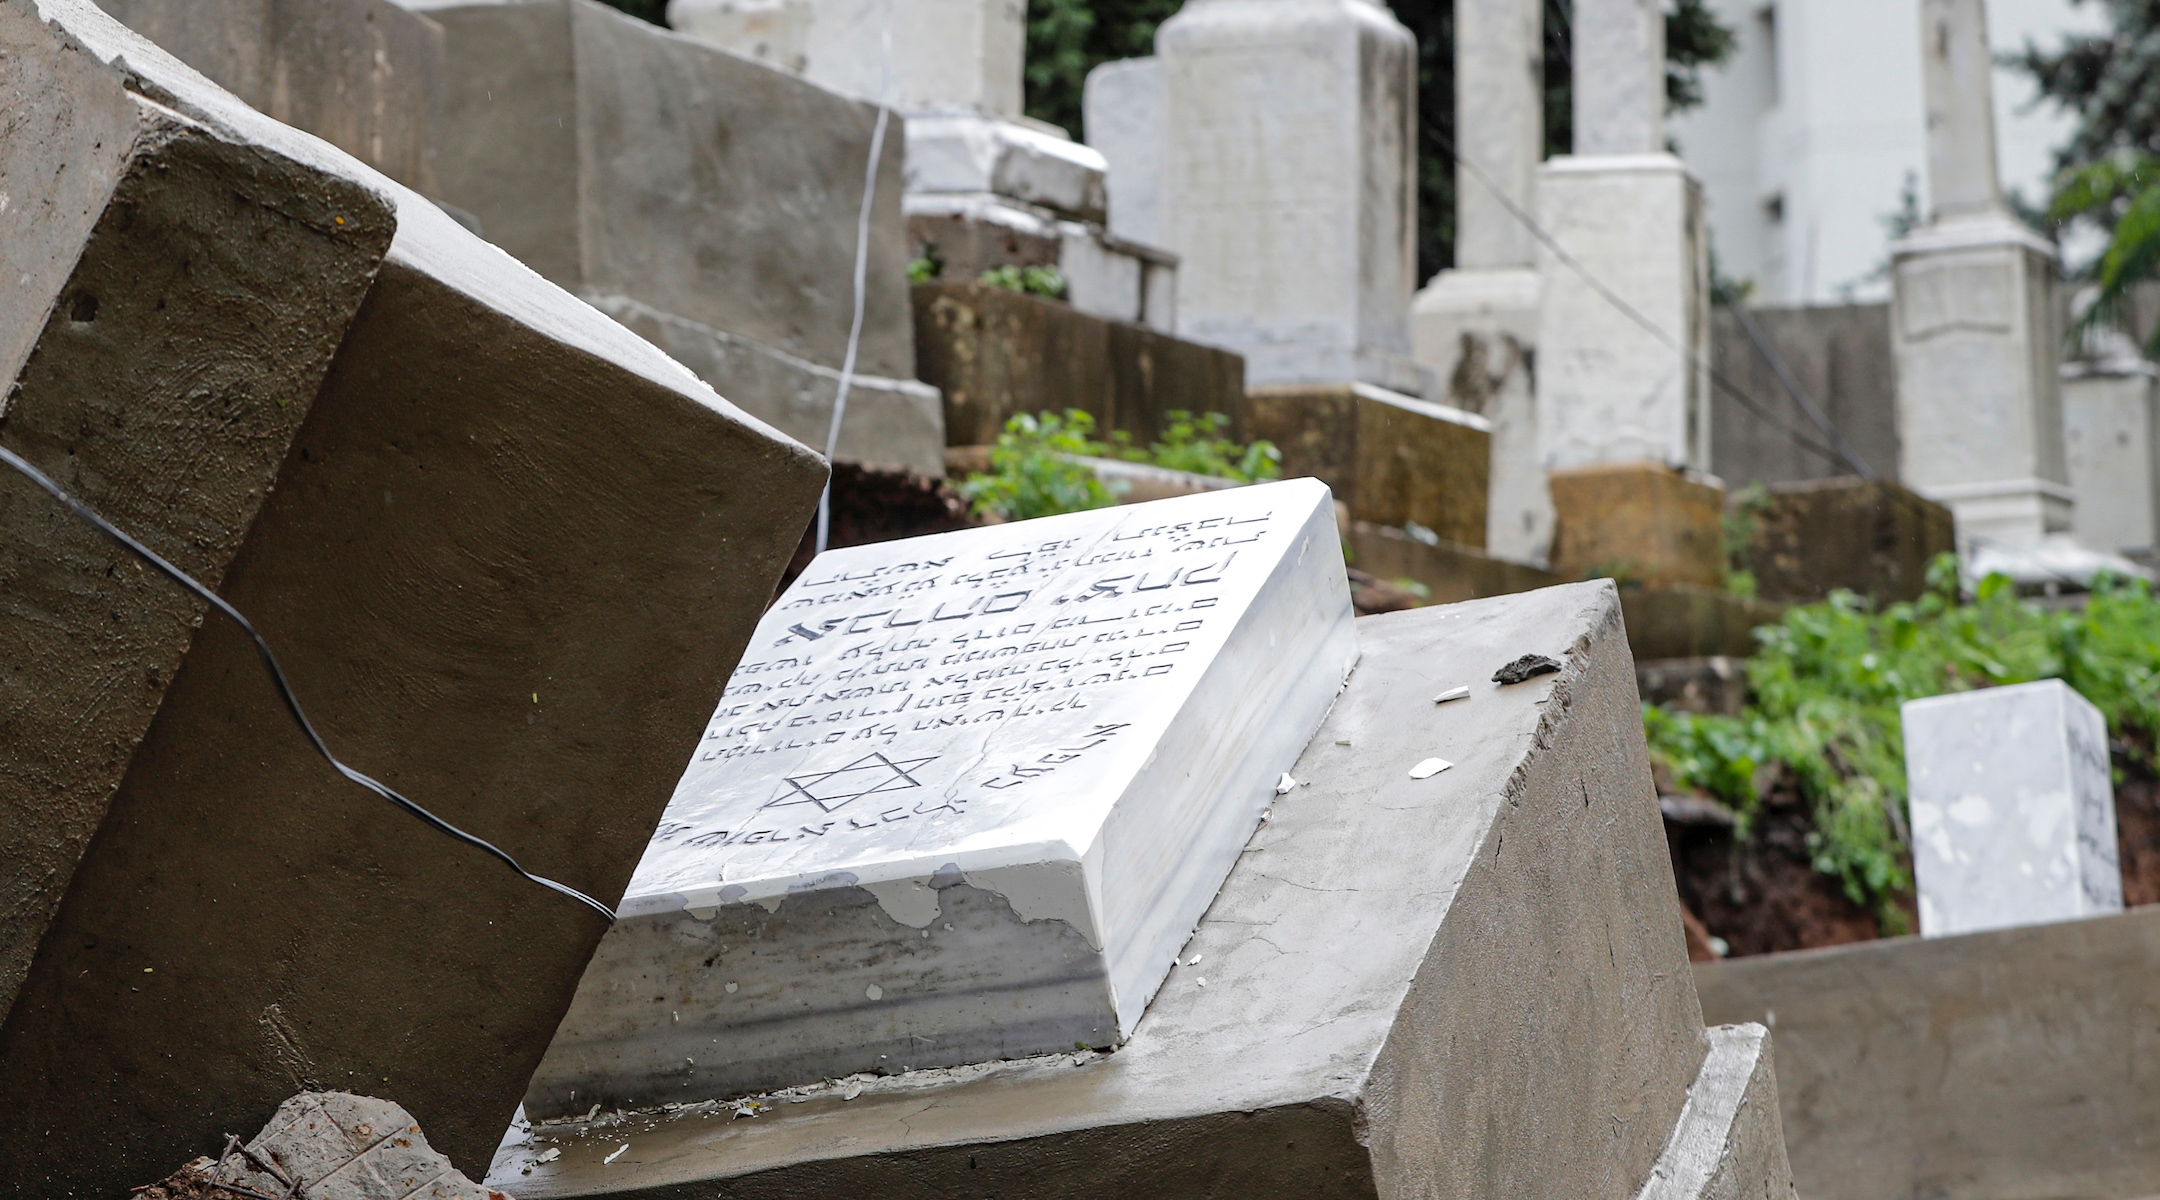 Damaged graves following a winter storm at the Jewish cemetery in Beirut. (Anwar Amro/Getty Images)